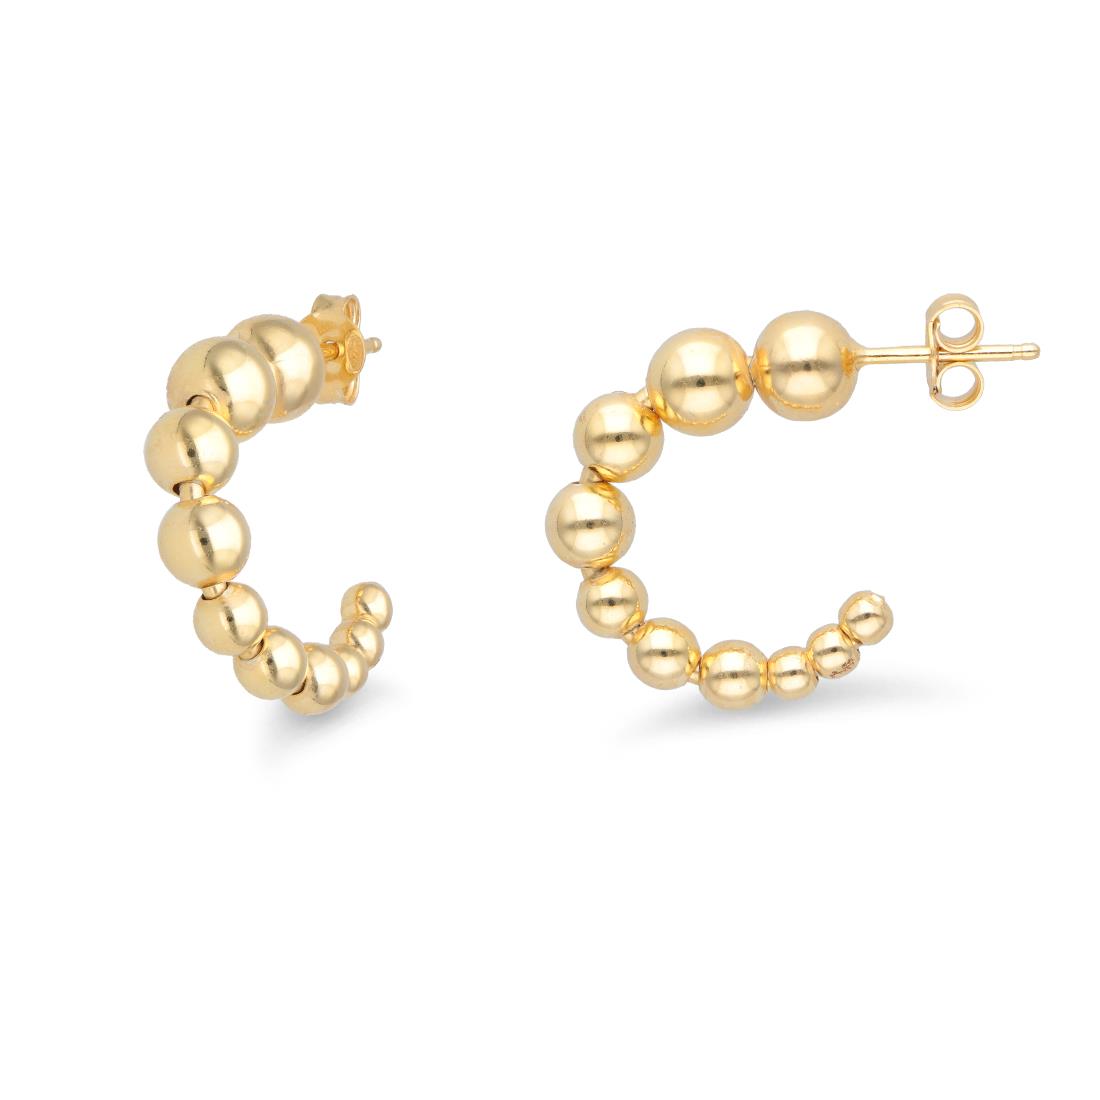 Hoop earrings with balls from the Hula Hoop collection in rhodium-plated 925 silver - LUXURY MILANO